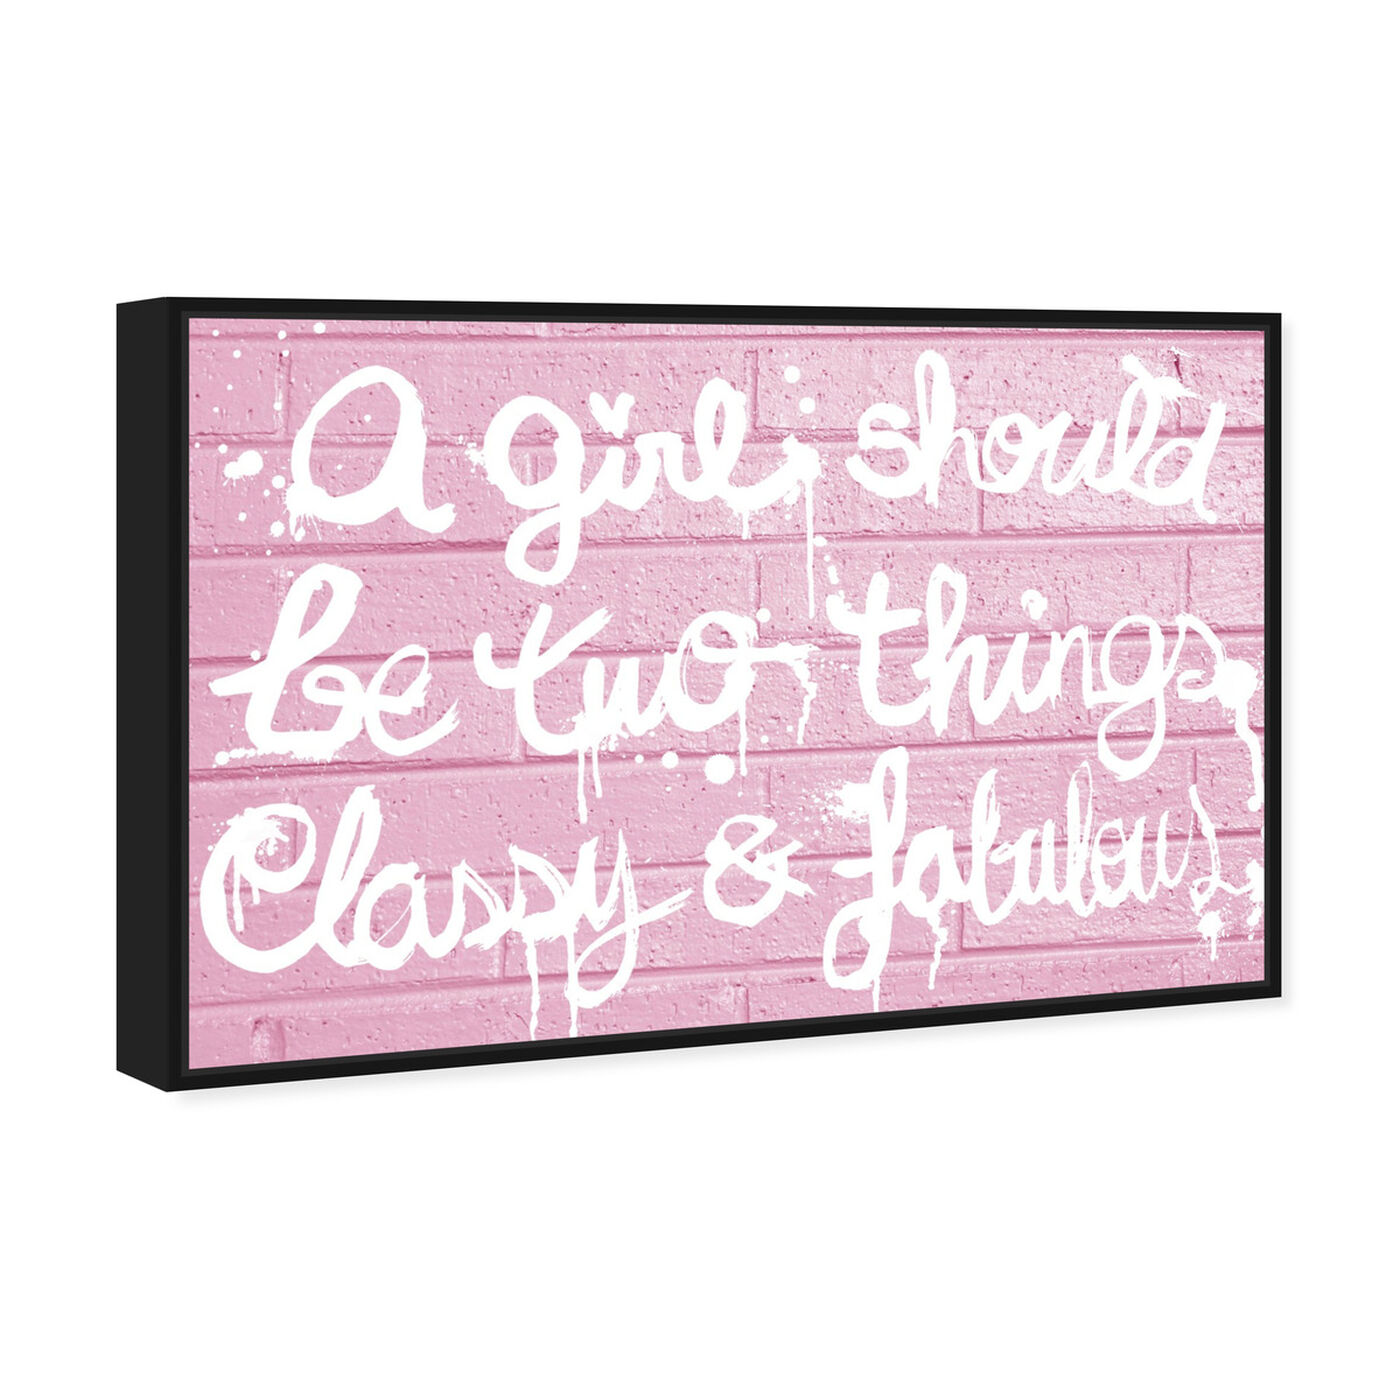 Angled view of Graffiti Fabulous II featuring typography and quotes and empowered women quotes and sayings art.